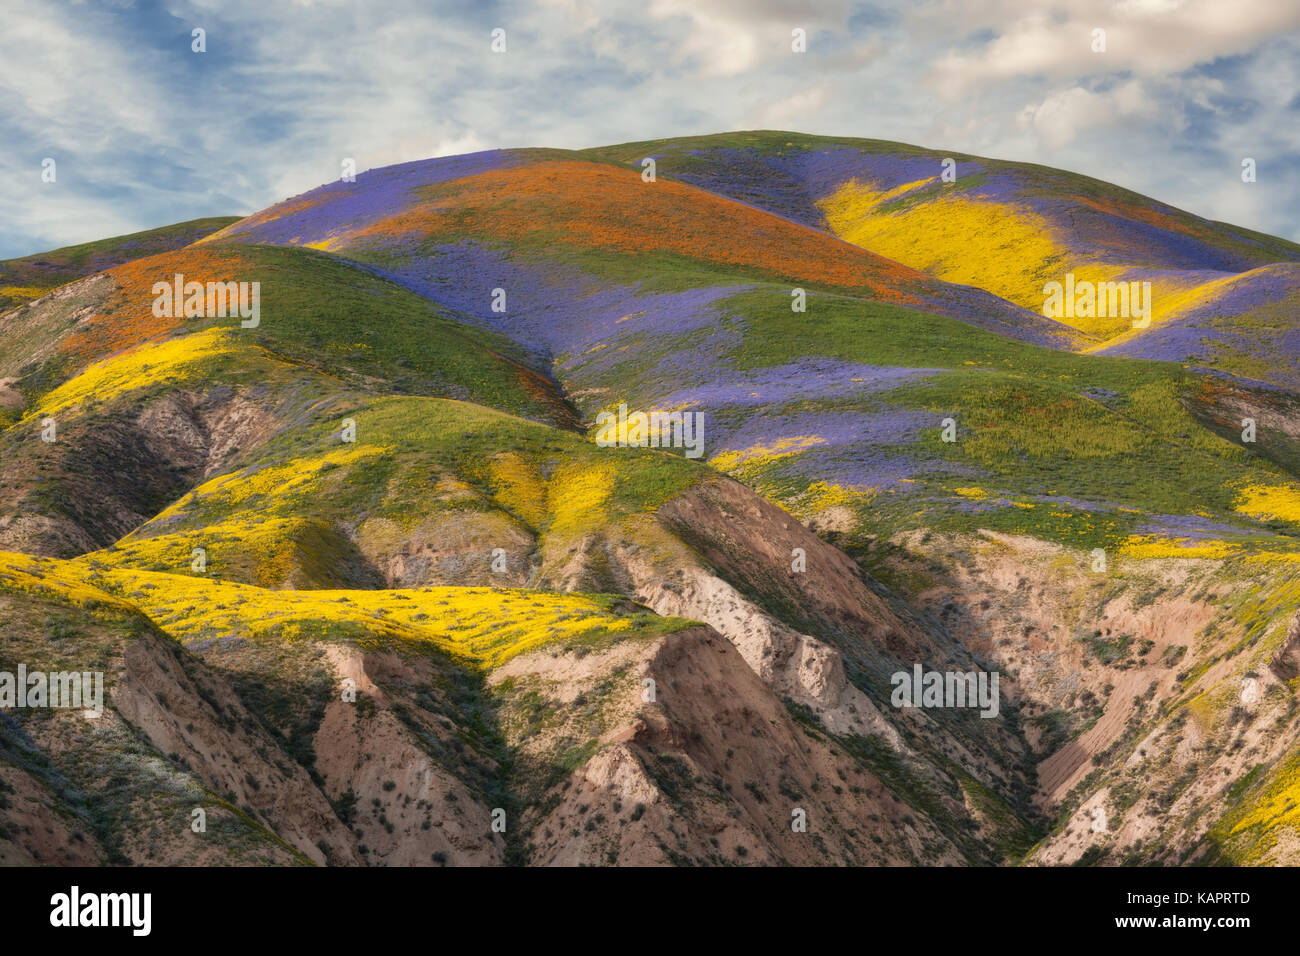 The super bloom of spring wildflowers on the Temblor Range in California’s Carrizo Plain National Monument. Stock Photo